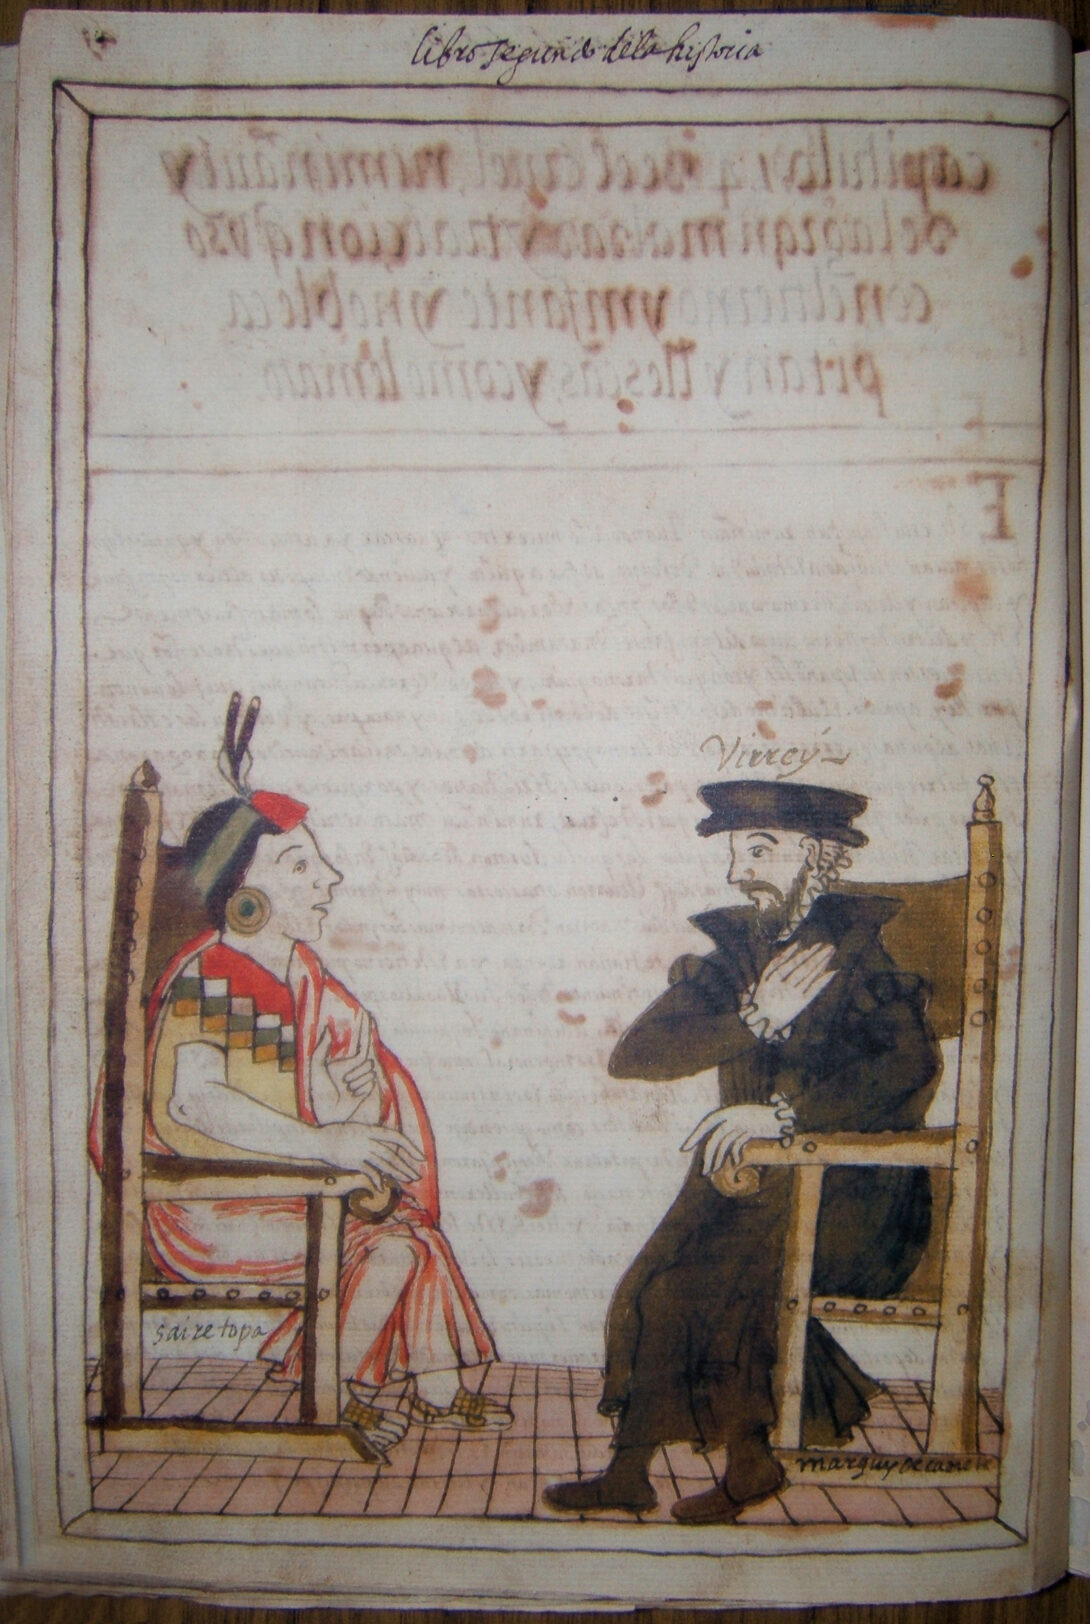 Page from a historical document showing an Inca ruler seated opposite a European colonizer